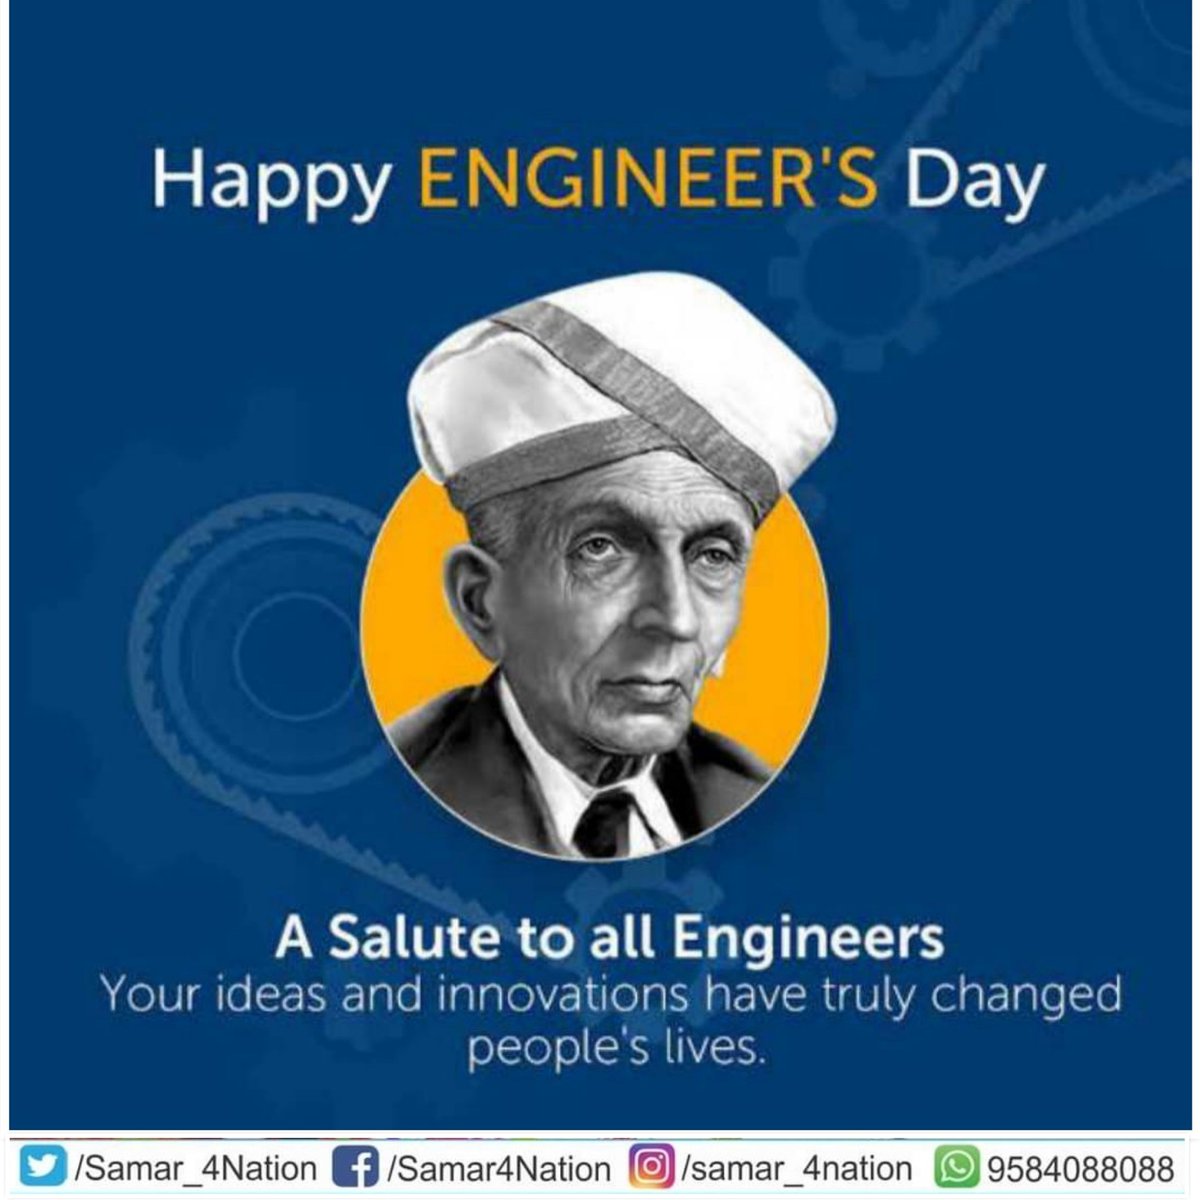 #Happy_Engineer's Day! 👷👷‍♀️
Science is About Knowing, Engineering is About Doing...
#EngineersDay - A day to Celebrate Innovation and Creativity! 
We are Witnessing the Transformation of Our World Driven by Digital Technologies .. 
#KeepLearning #KeepGrowing  #ThinkLearning